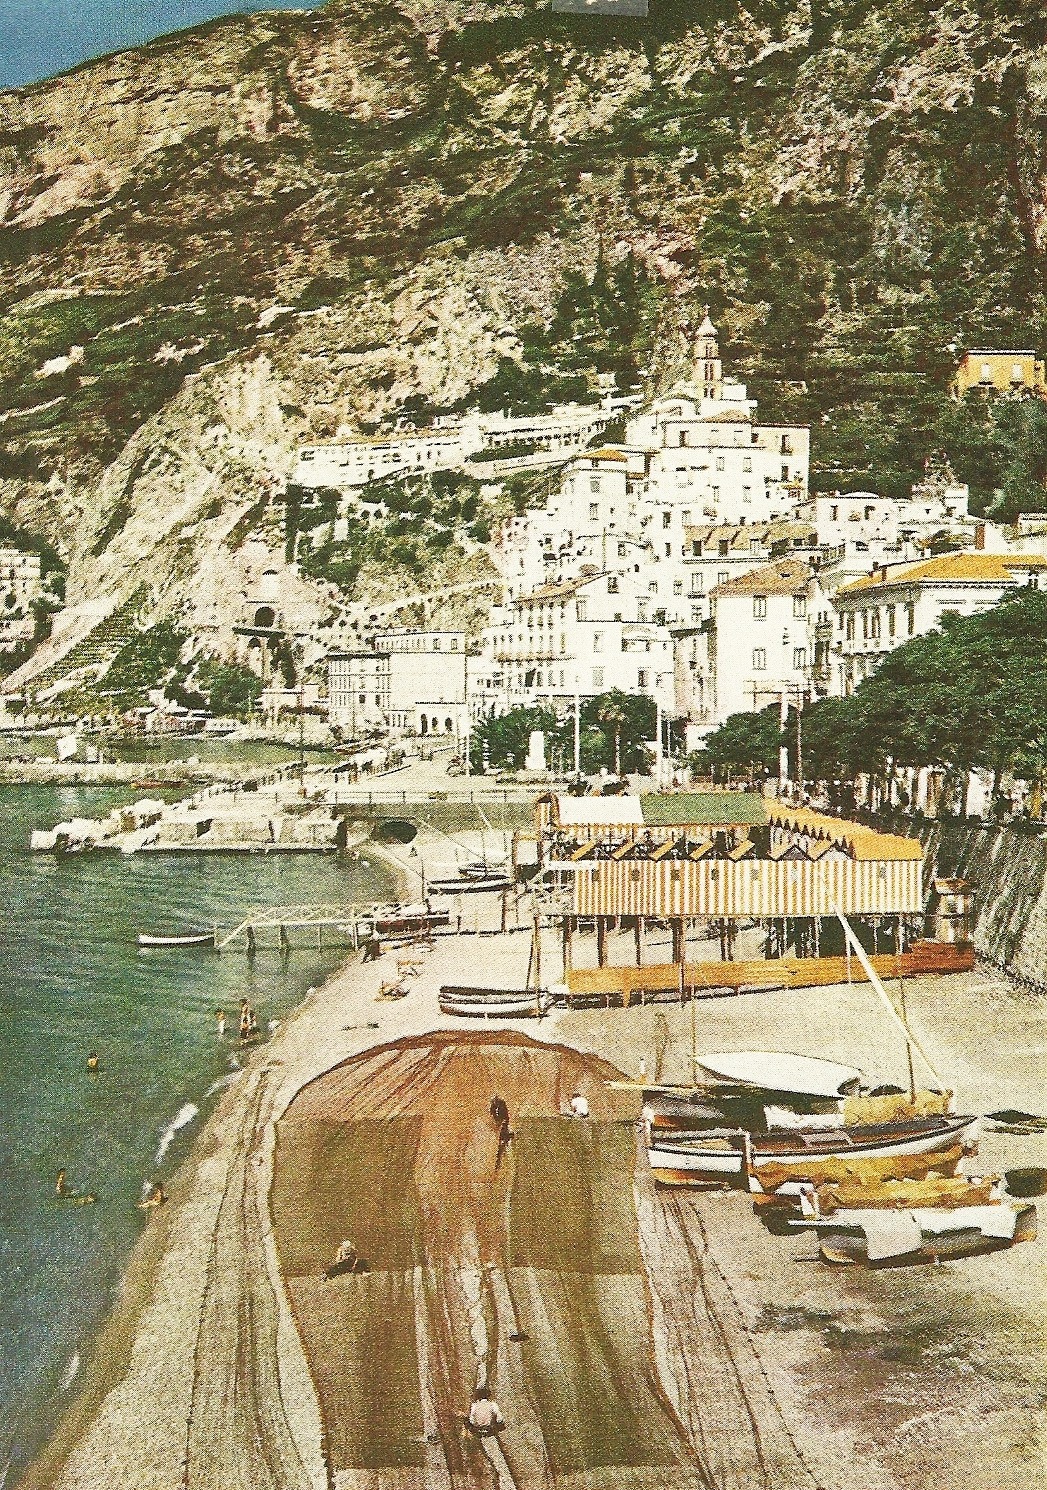 Amalfi, Italy on the MediterraneanNational Geographic | March 1940